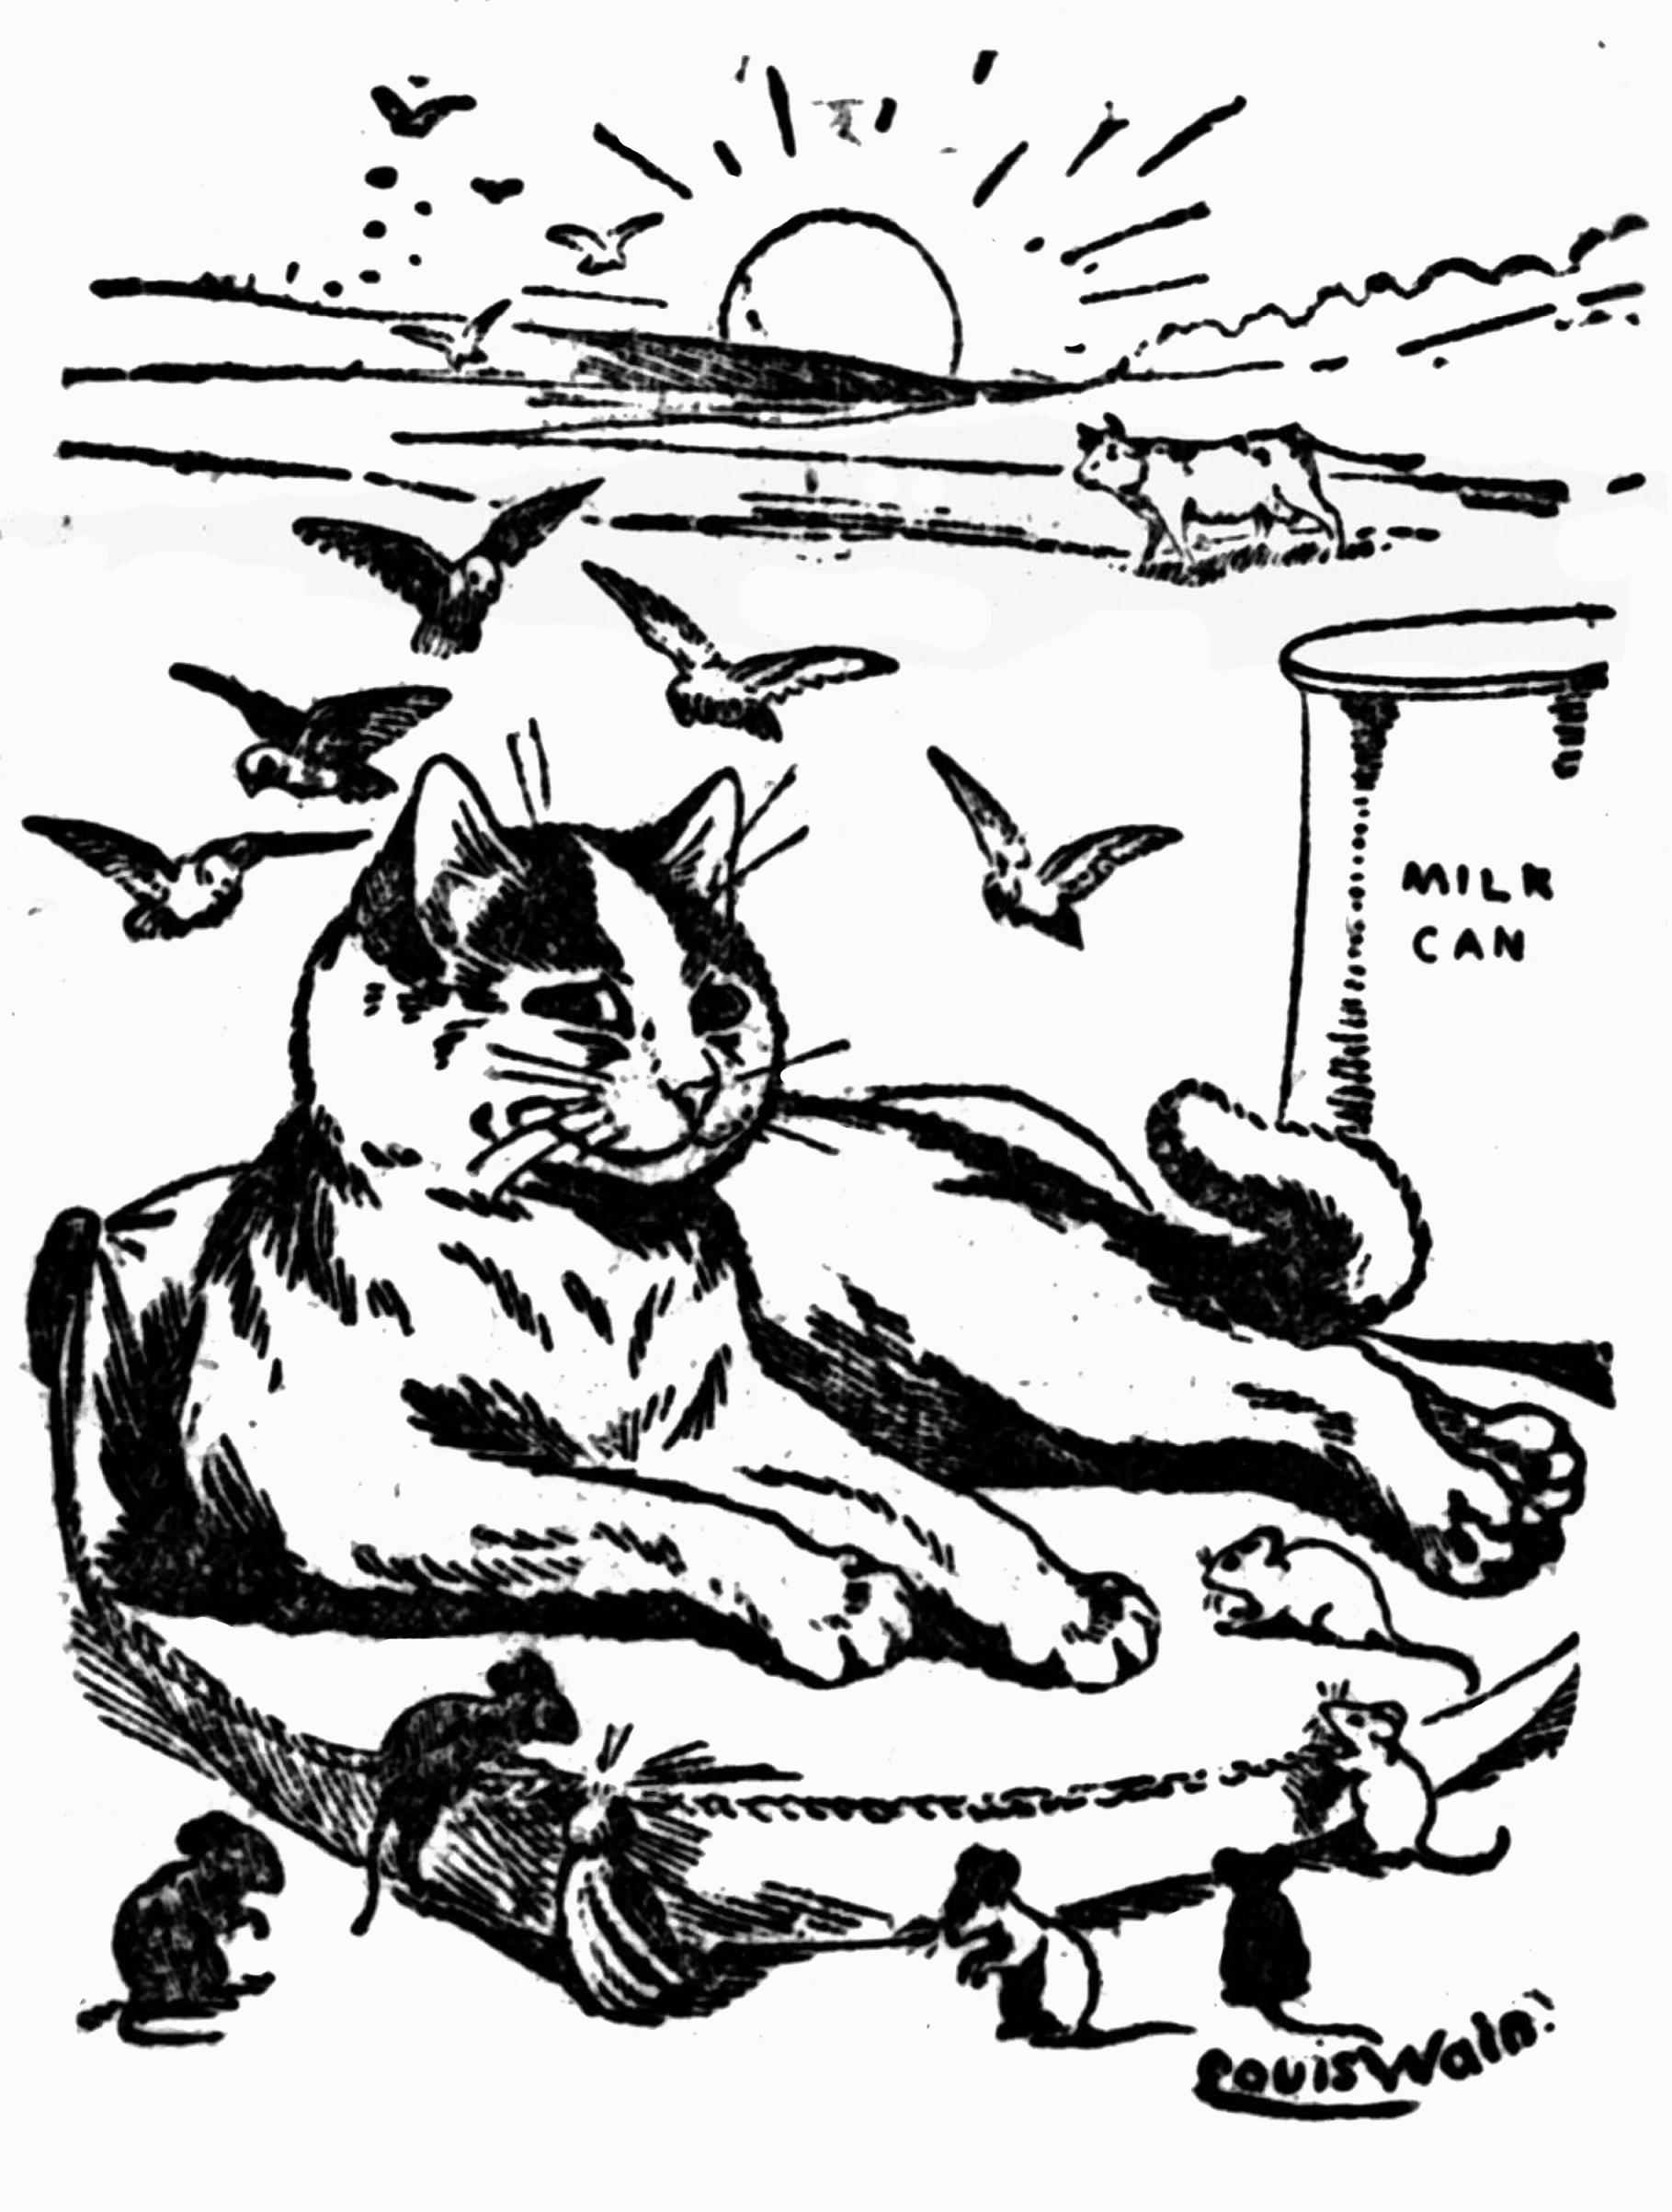 Louis Wain illustration with: 1905, bird, black_and_white, cat, cat:tuxedo, color:black, color:white, cow, manysubjects, meta:has_source, mouse, newspaper_publication, outdoors, realistic, series:nine_lives, signature, smiling, subject:religion, sunset